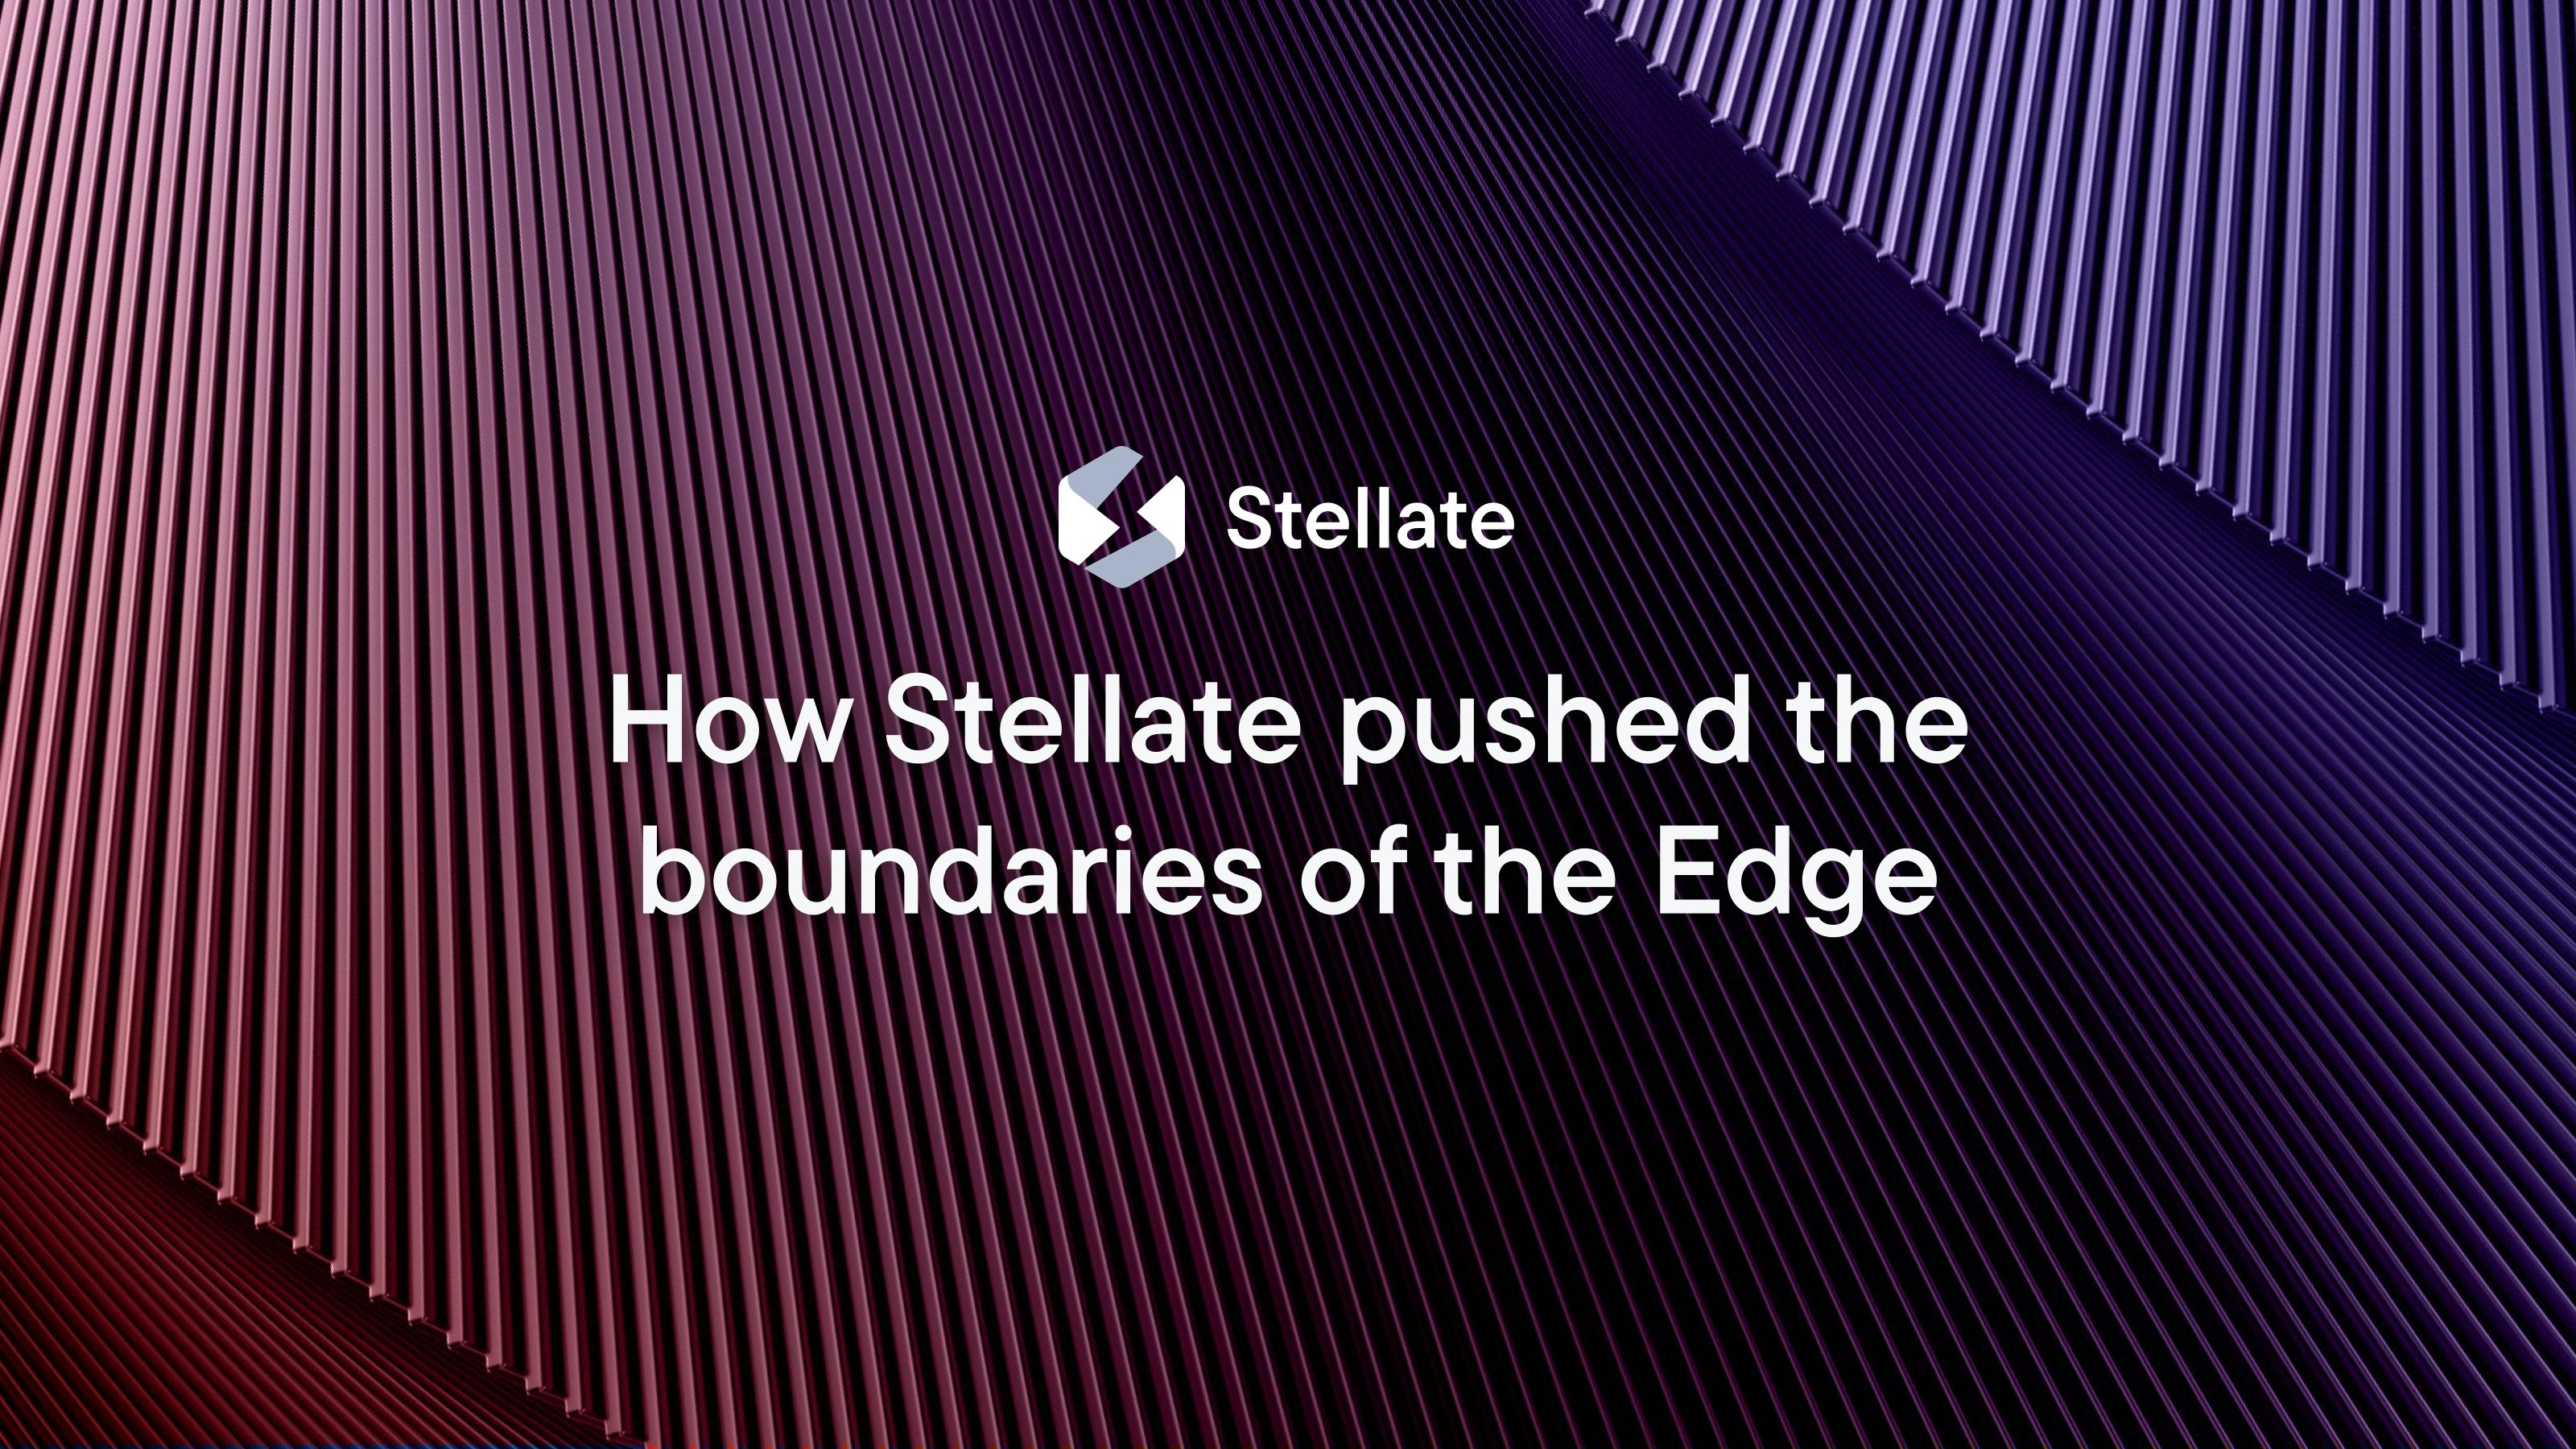 How Stellate pushed the boundaries of the Edge